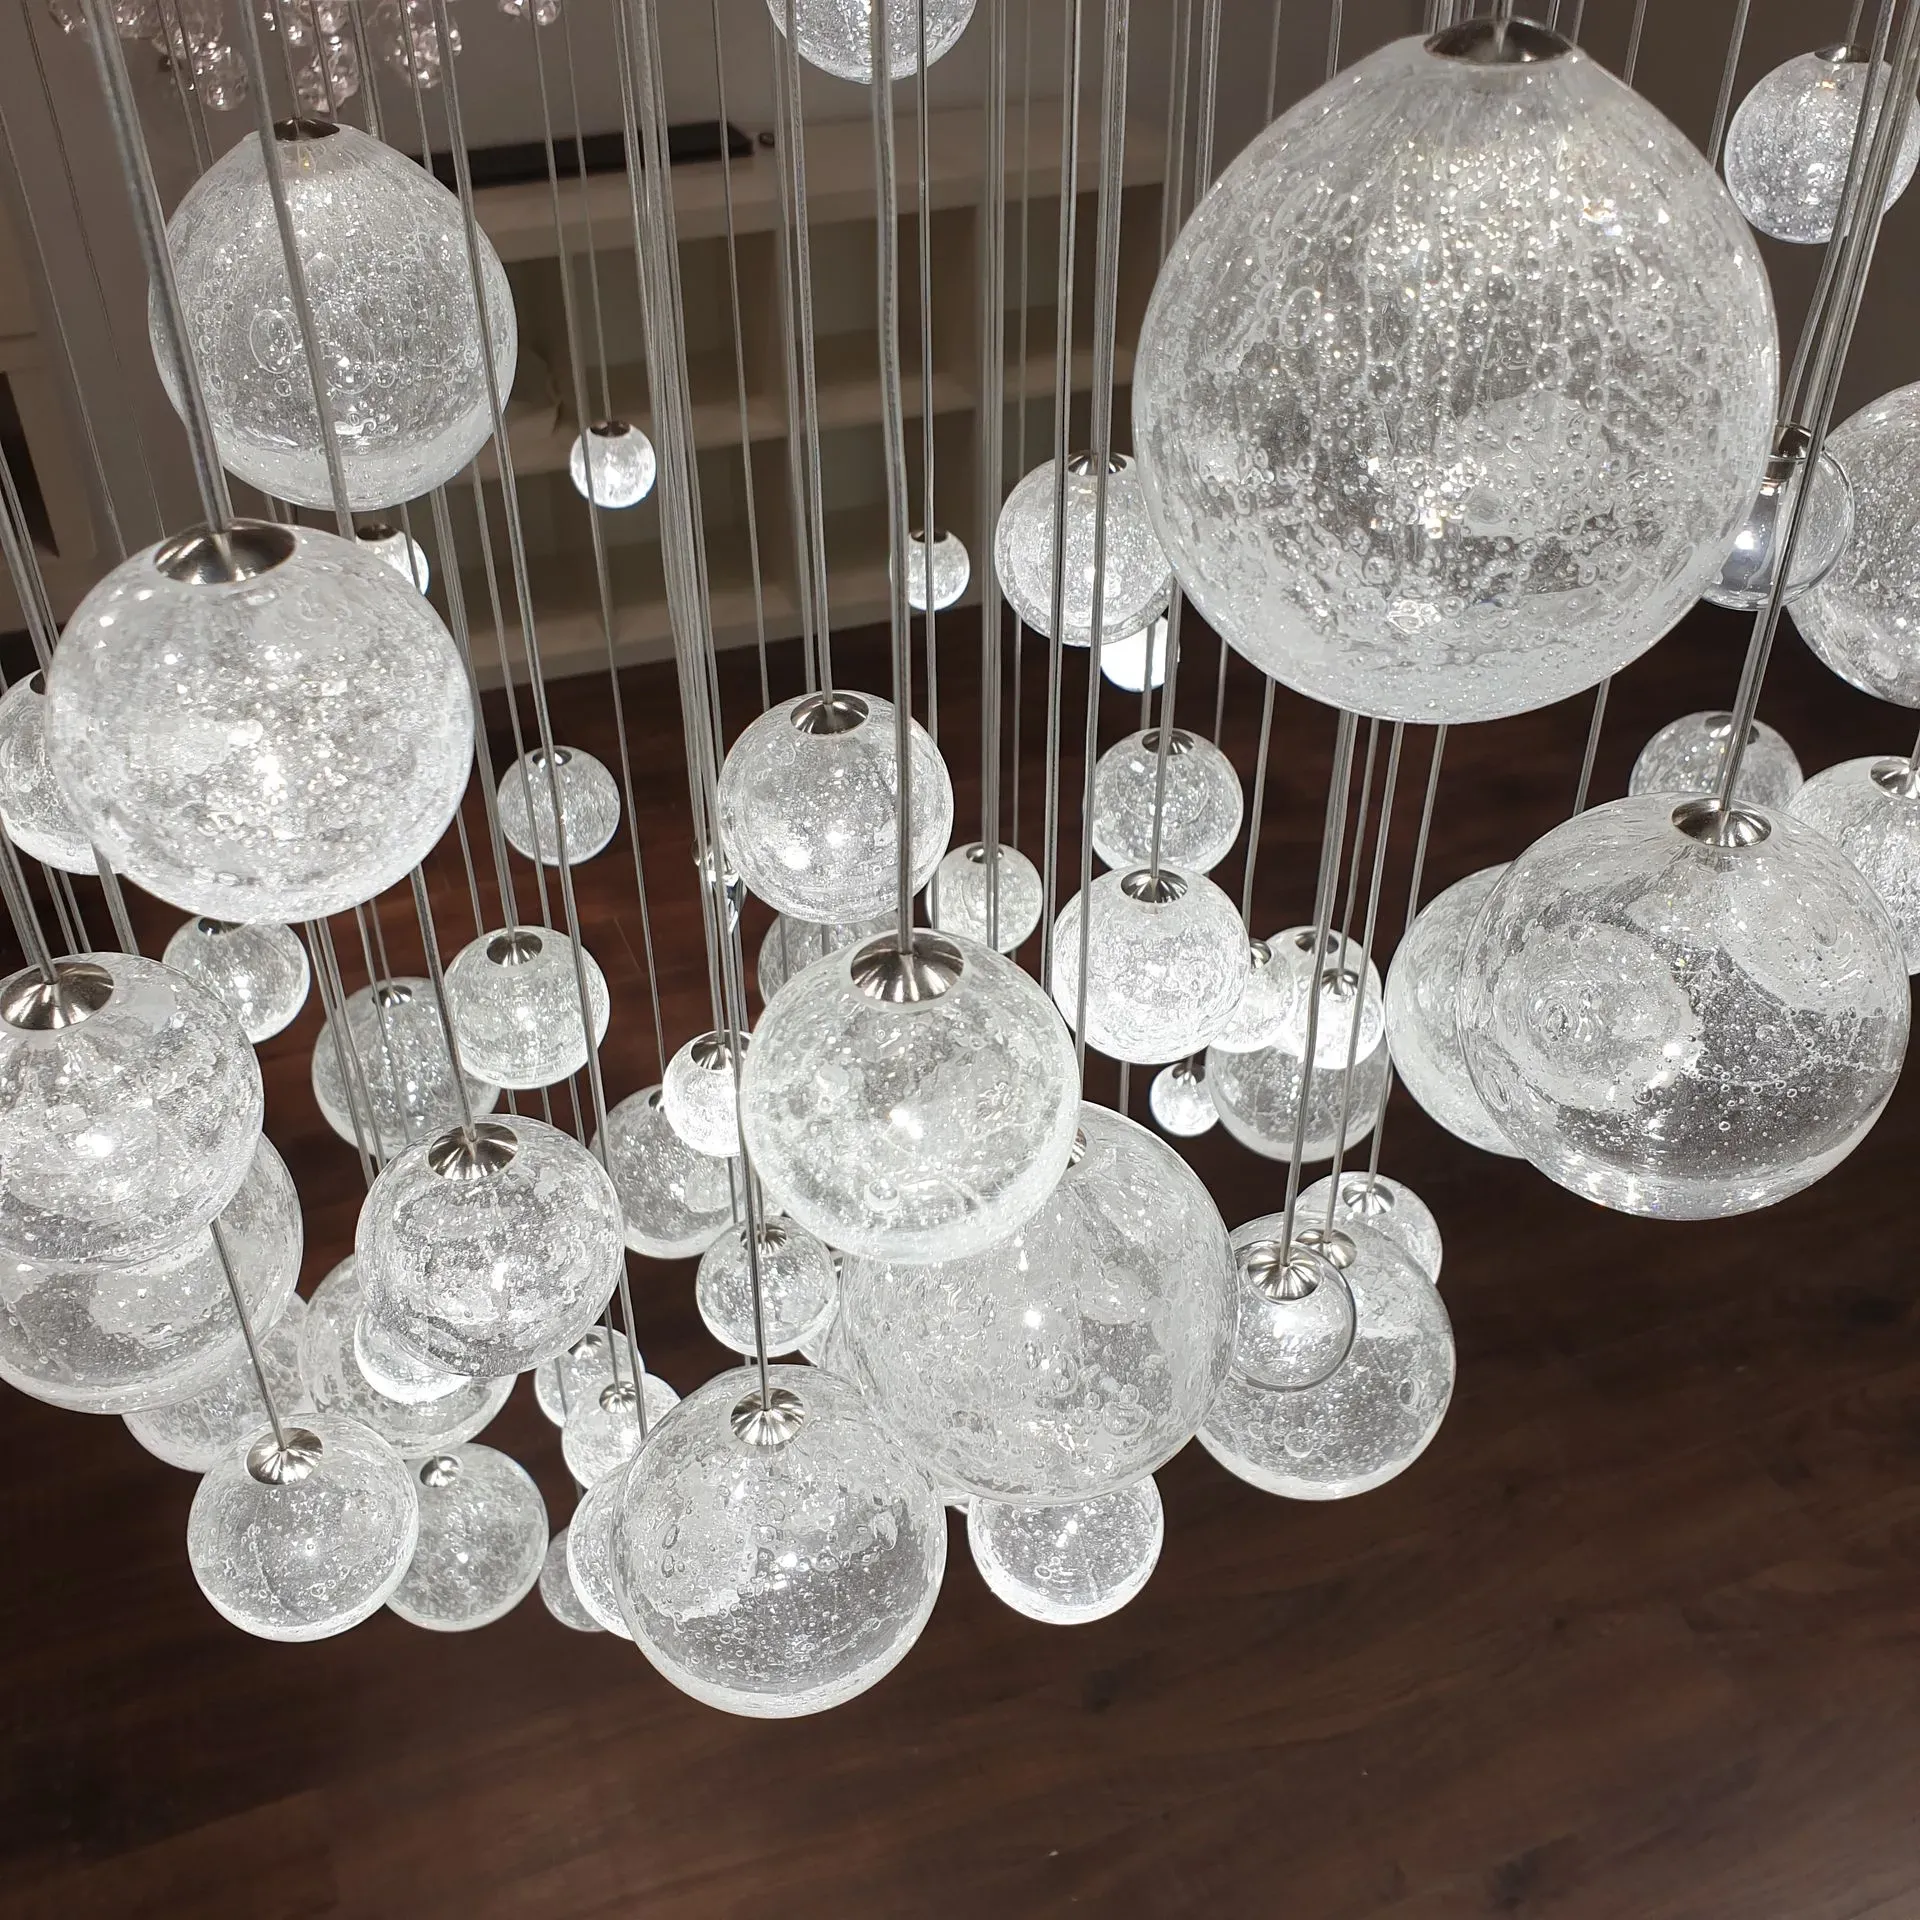 ELUDA modern design chandelier made of glass and LED modules for livingroom, bedroom, hotel large interior spaces. TOP view